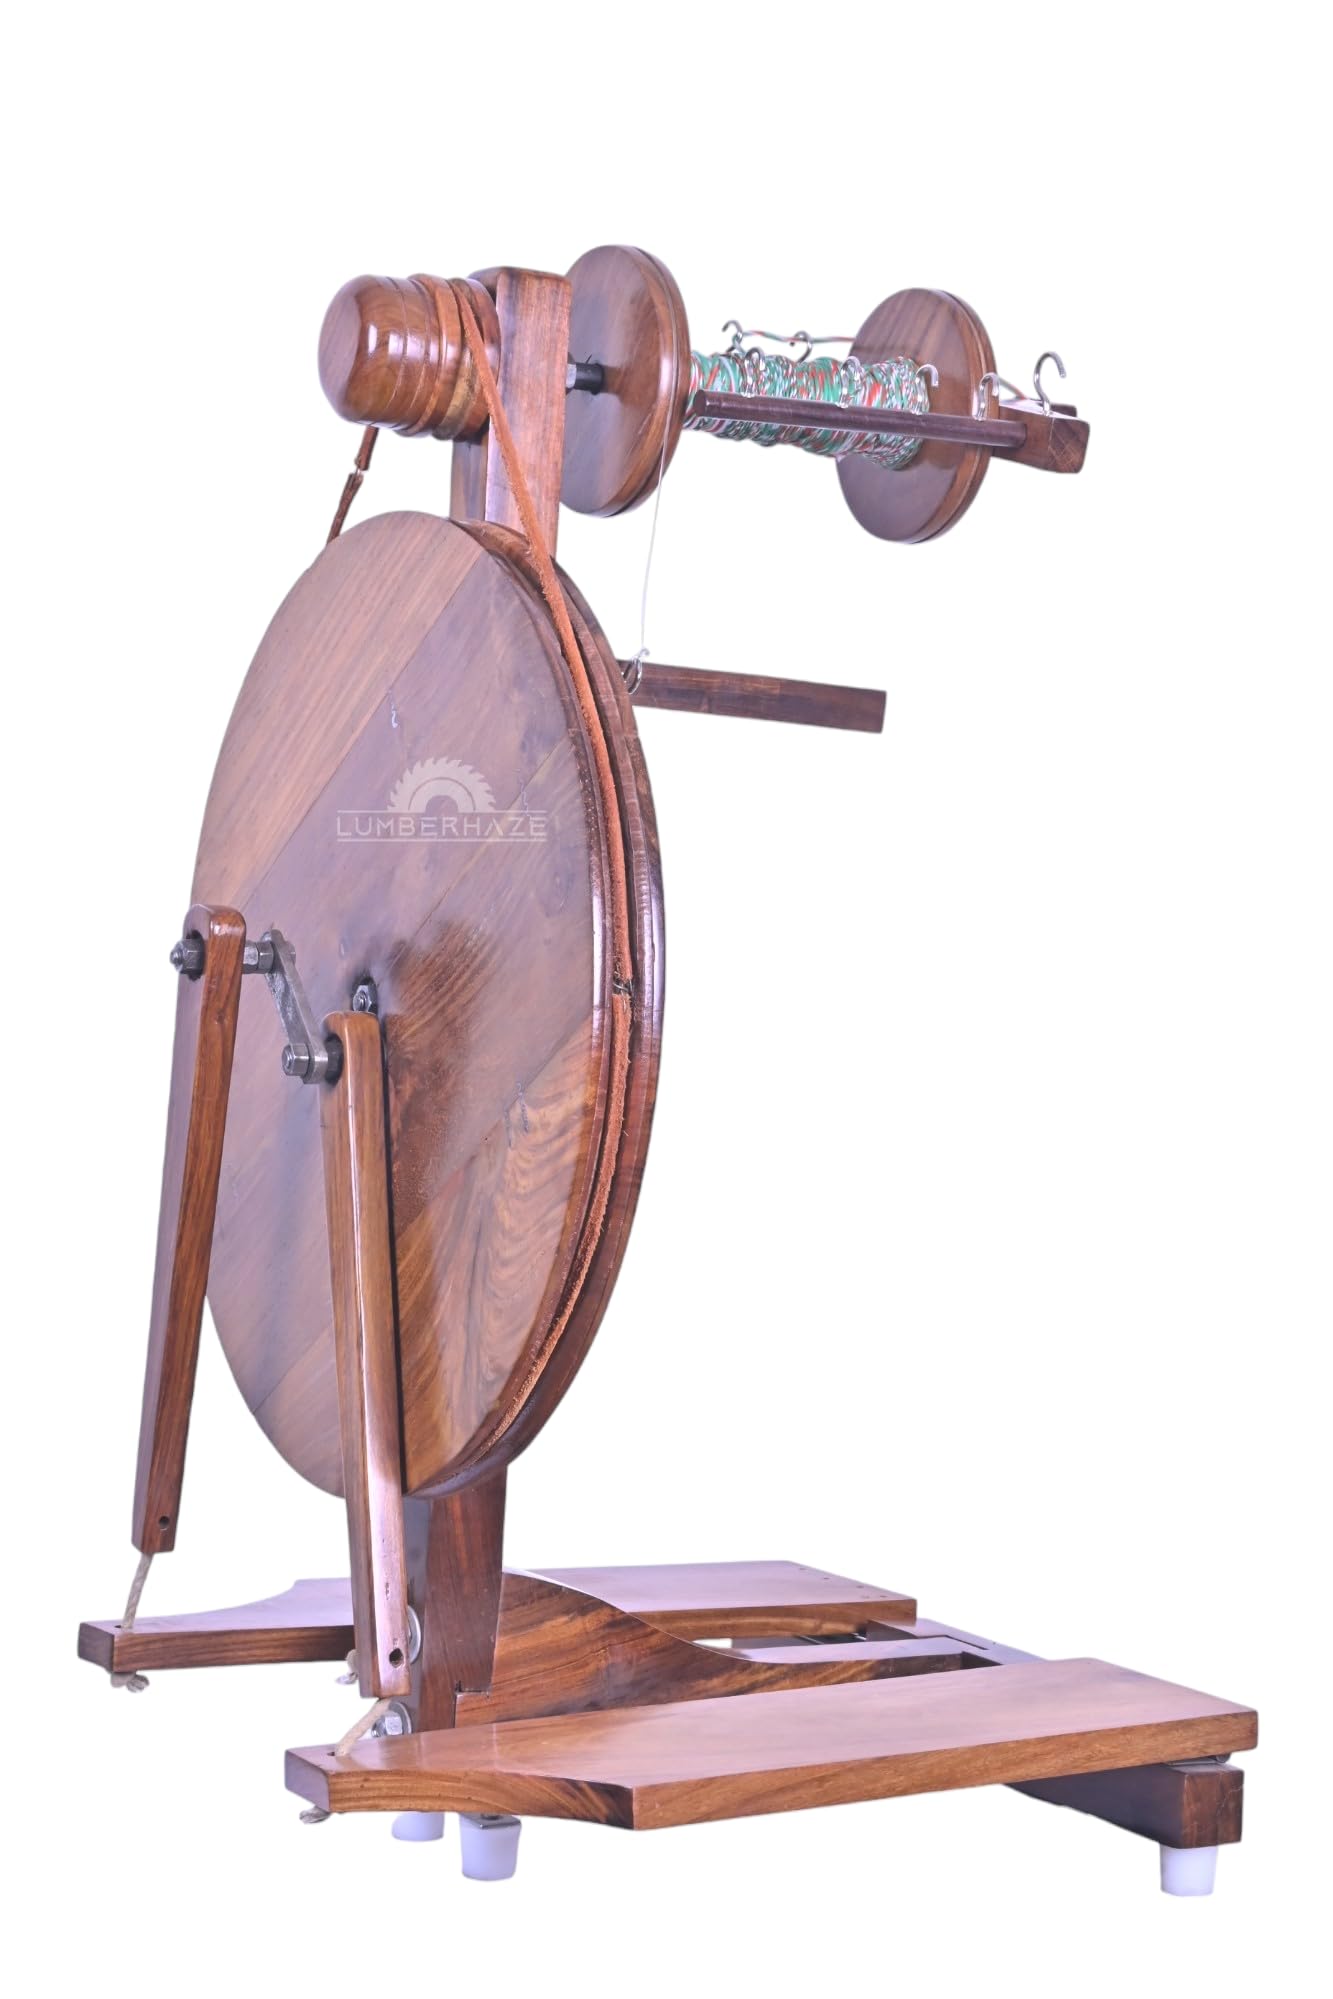 Lumberkart Handmade Wooden Spinning Wheel with 3 Bobbins for Beginners and Professional Spinners, 16 Inch Wheel